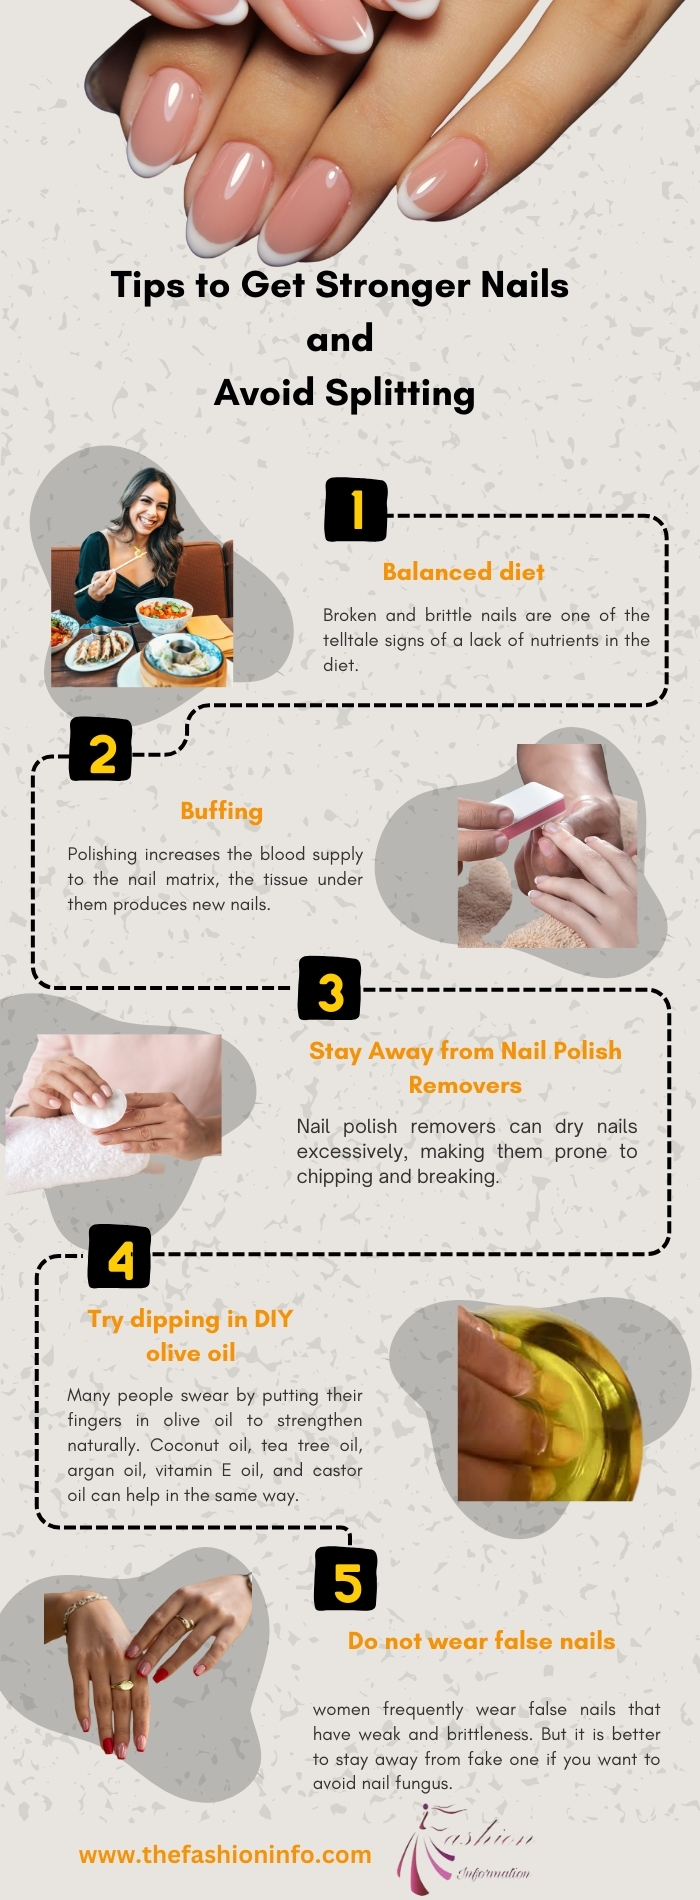 Tips to Get Stronger Nails and Avoid Splitting